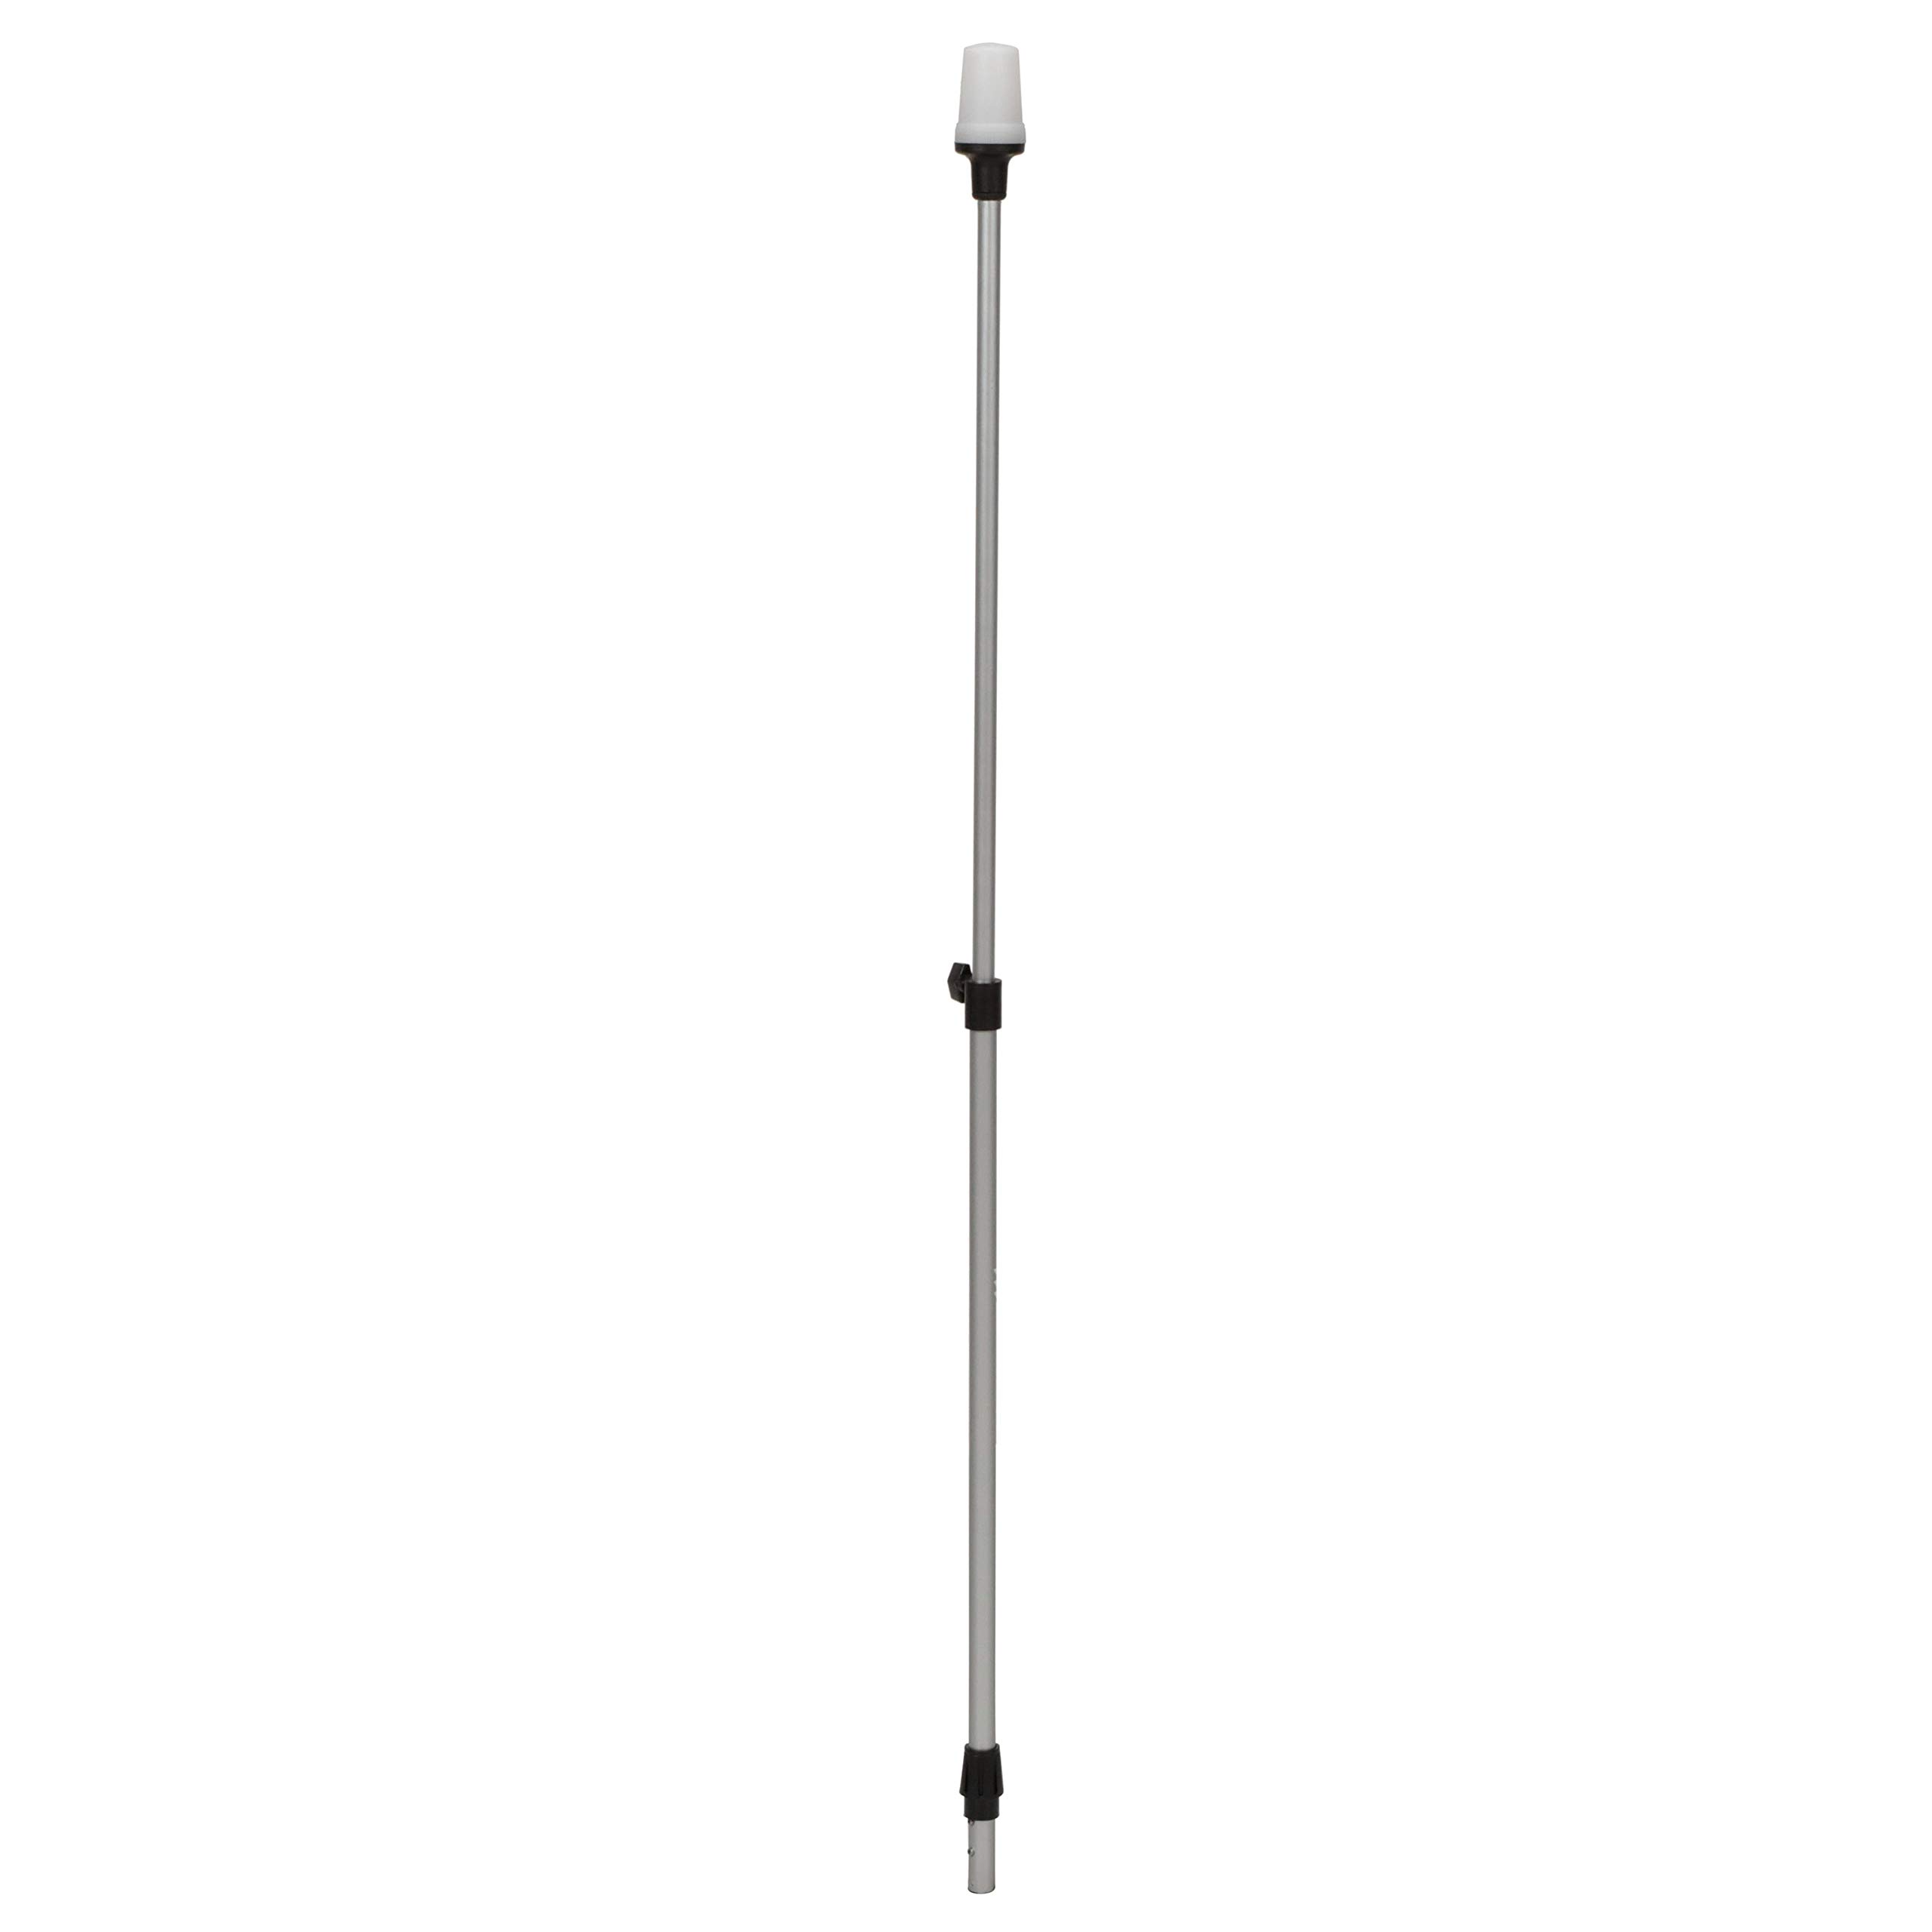 Attwood 5610-48-7 Telescoping Pole Light, All-Around Light, Height-Adjustable 26-42 inches, 2 Mile 360-Degree Visibility